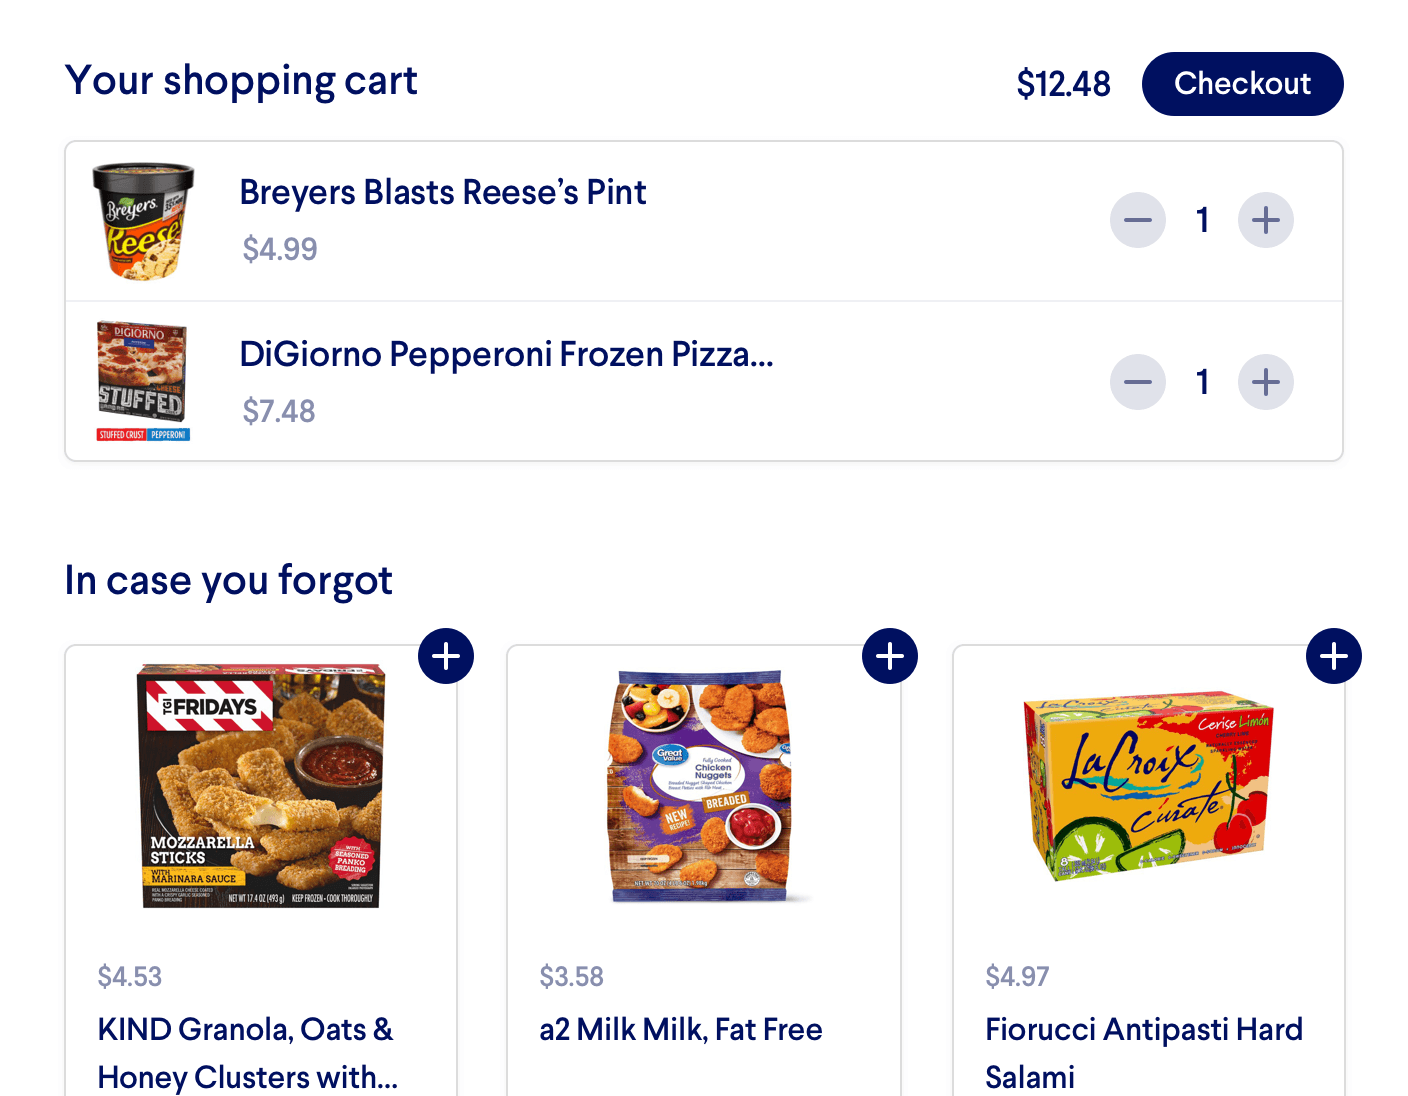 Example for Cart Cross-Selling